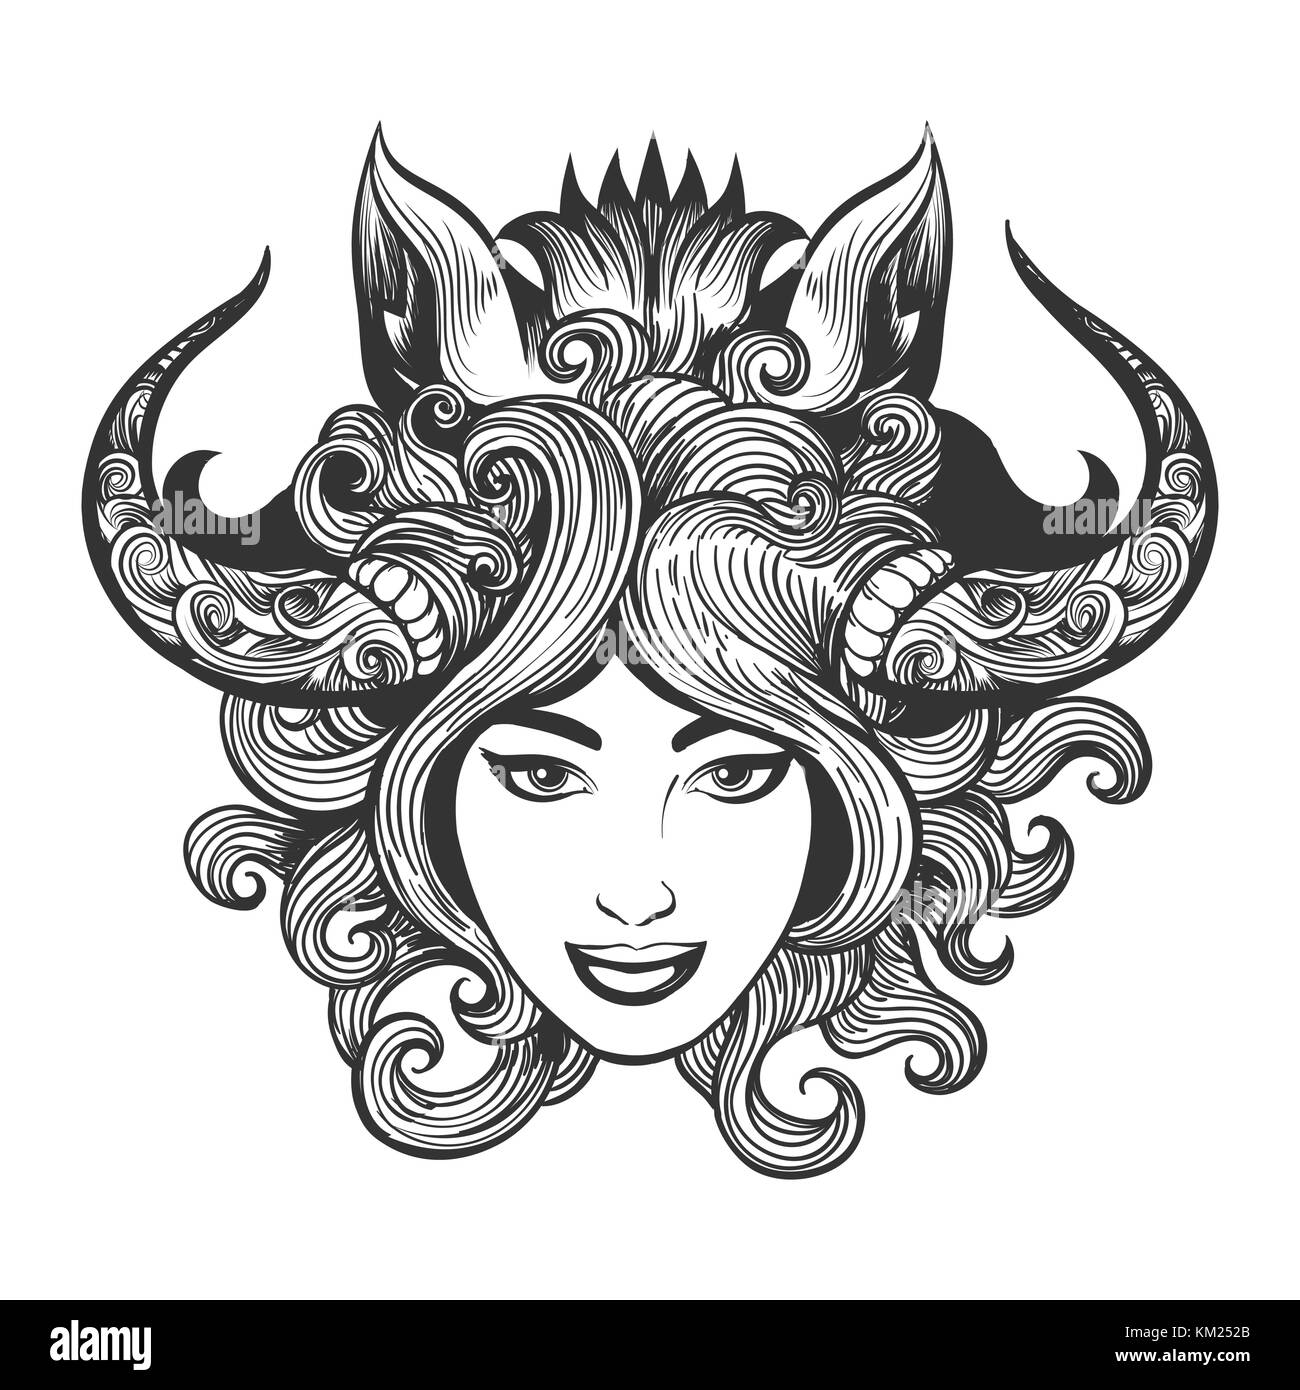 Girl face in shaman mask of boar drawn in tattoo style. Vector illustration. Stock Vector